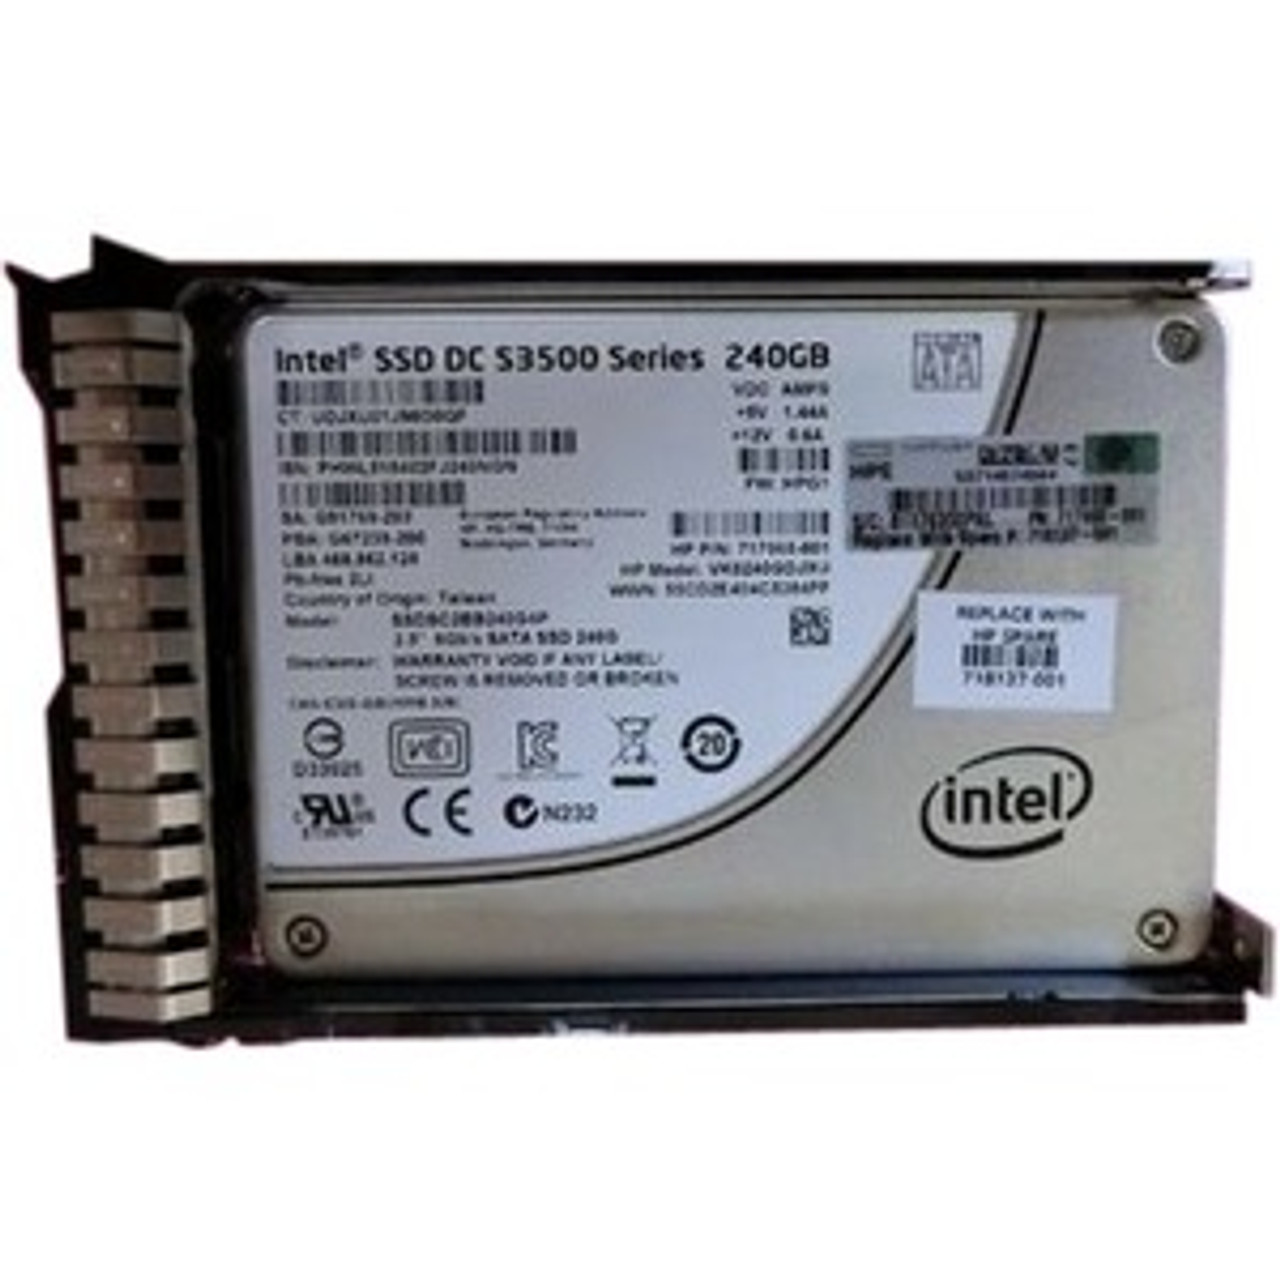 HPE - IMSourcing Certified Pre-Owned 240 GB Solid State Drive - 2.5" Internal - SATA  MFR P/N 718137-001-RF